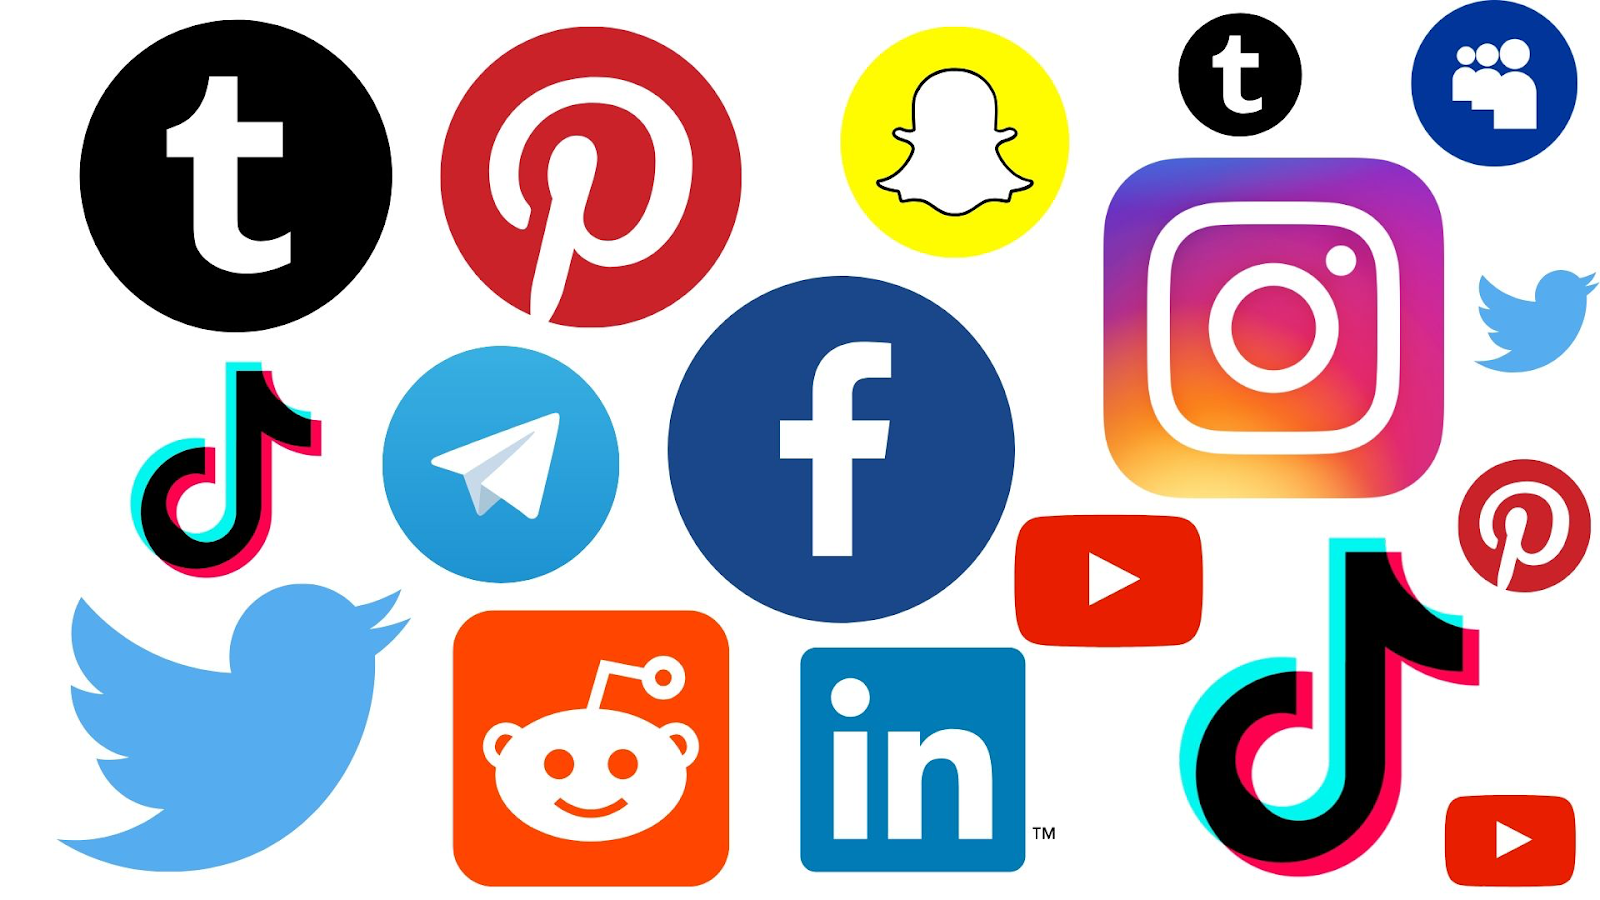 The Top 25 Social Media Networks You Should Know in 2021